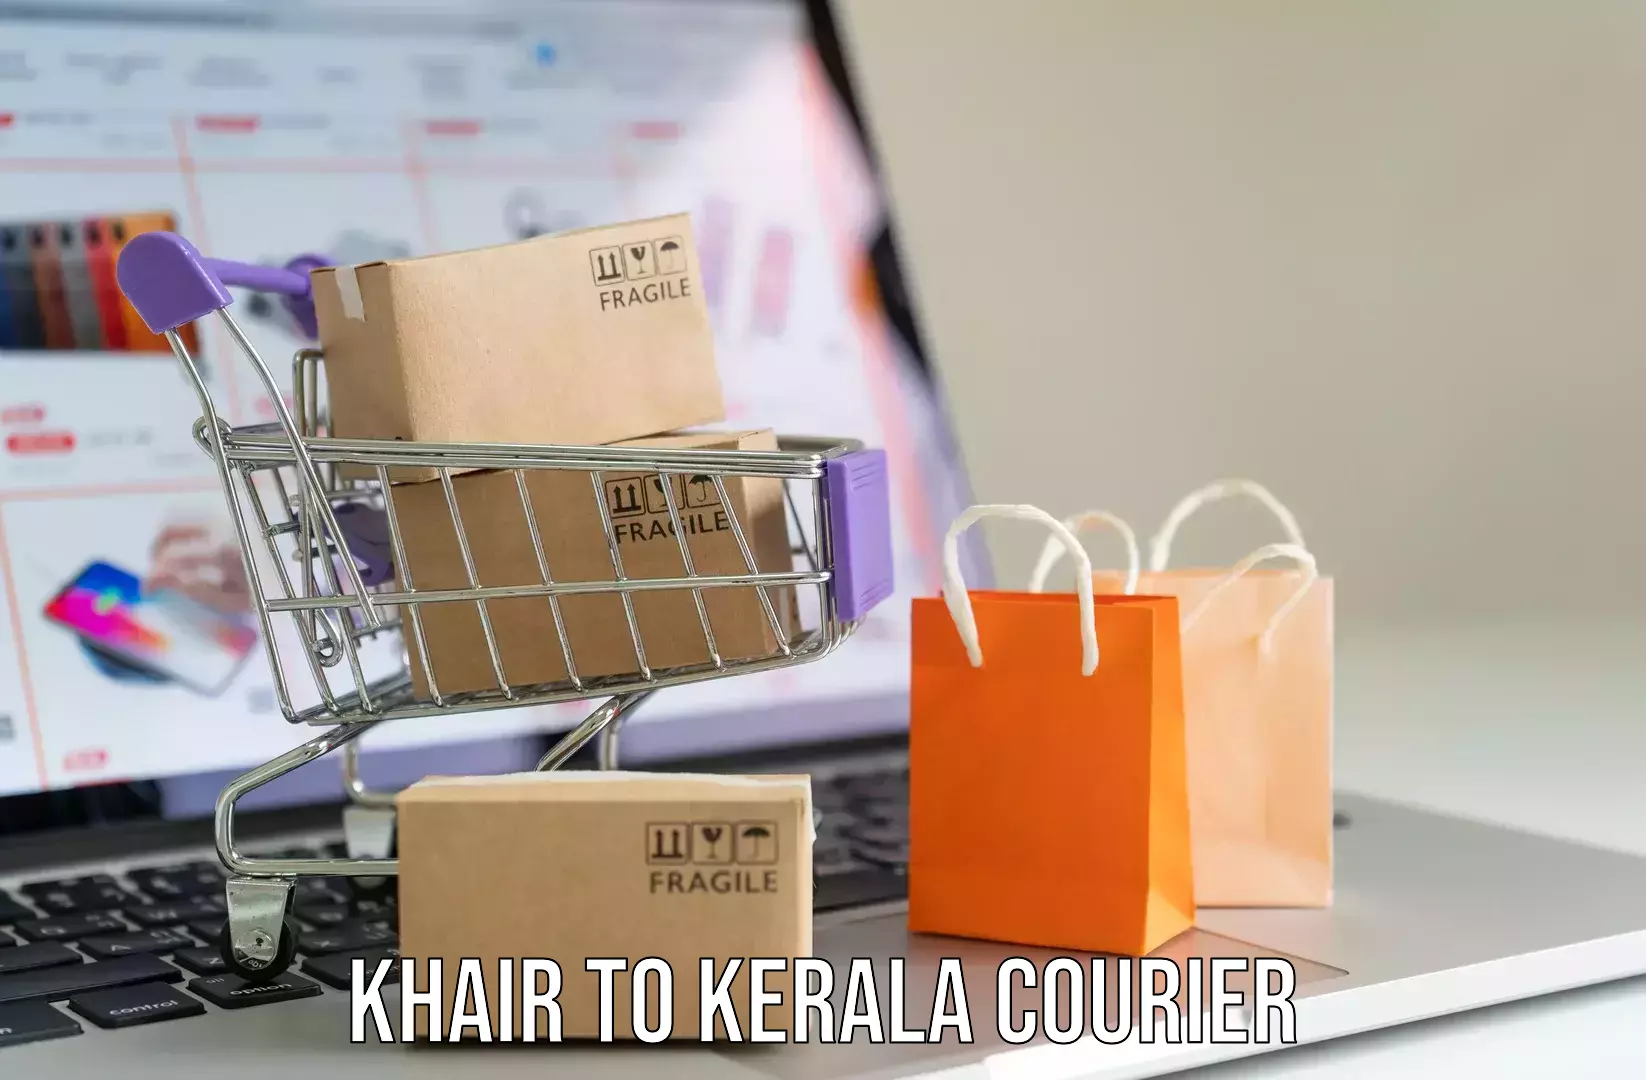 Luggage delivery system Khair to Kerala